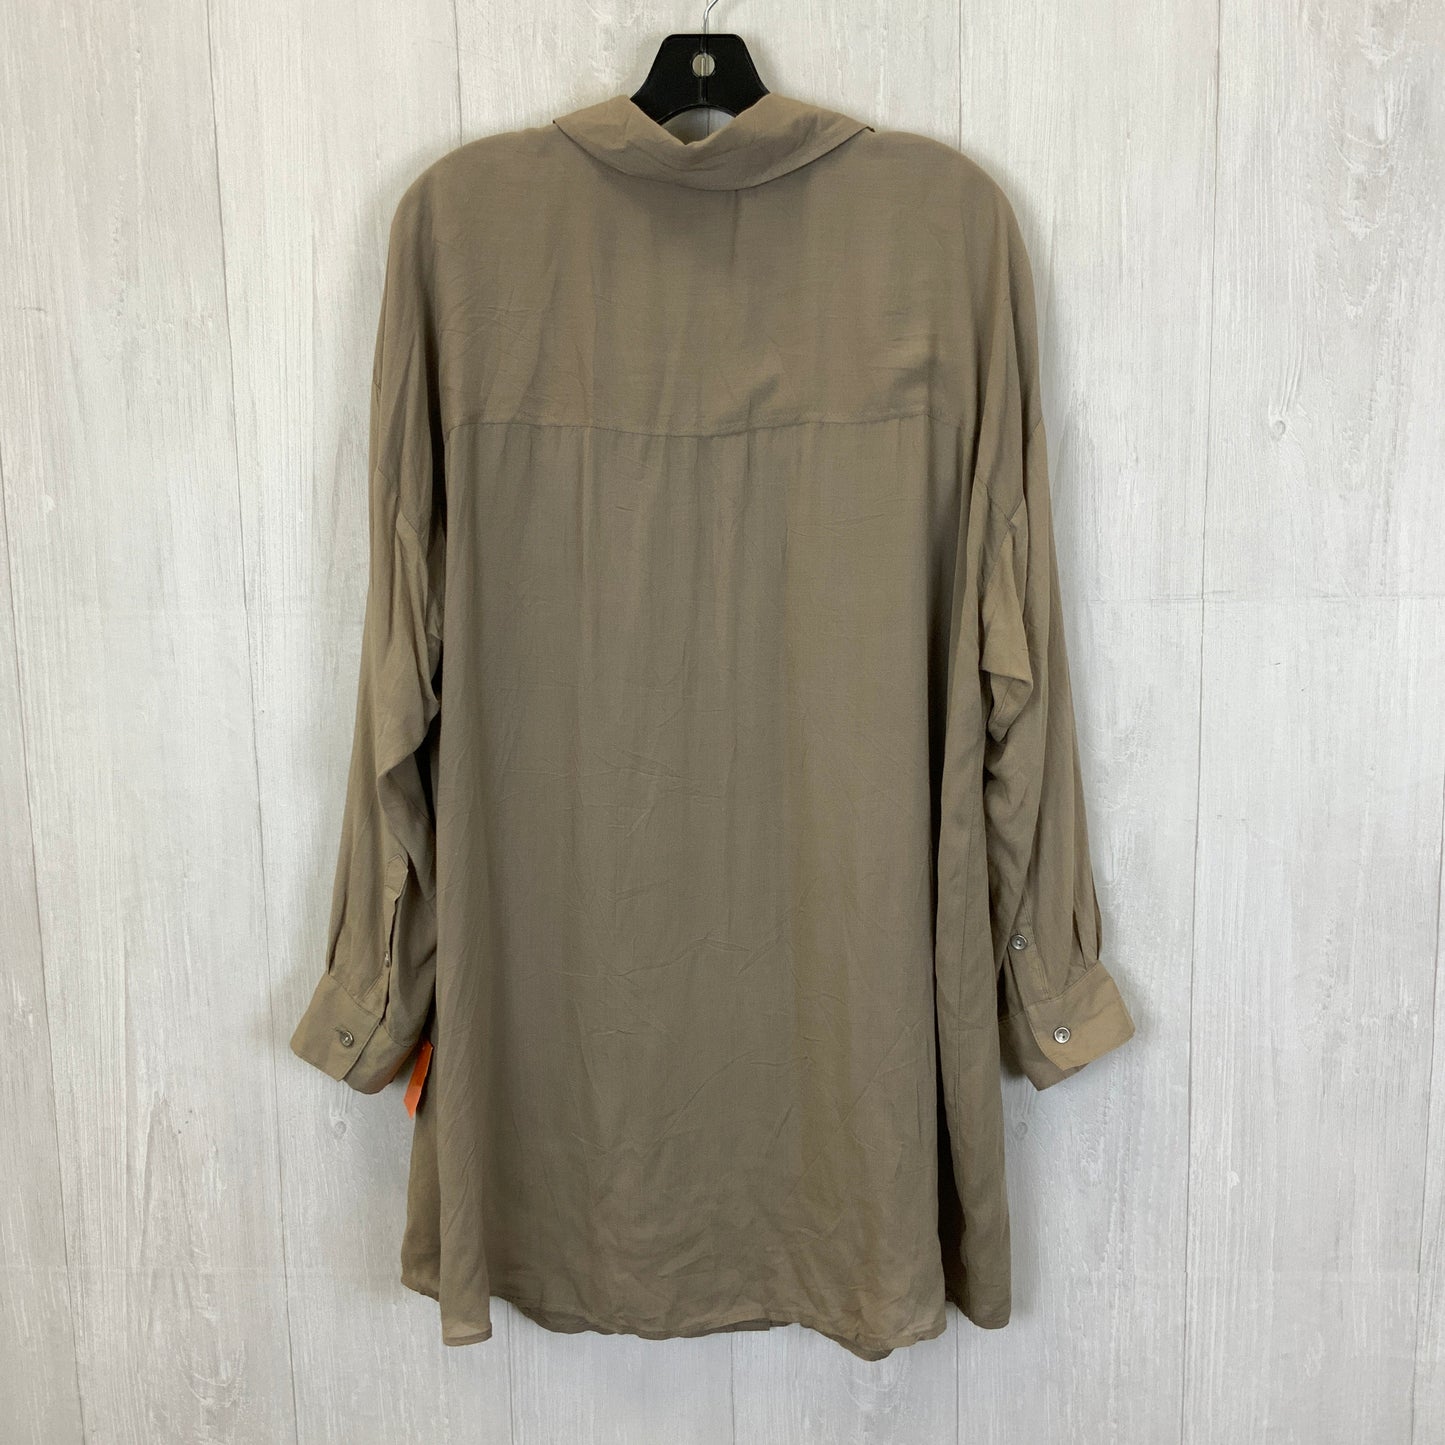 Taupe Top Long Sleeve Apostrophe, Size 2x